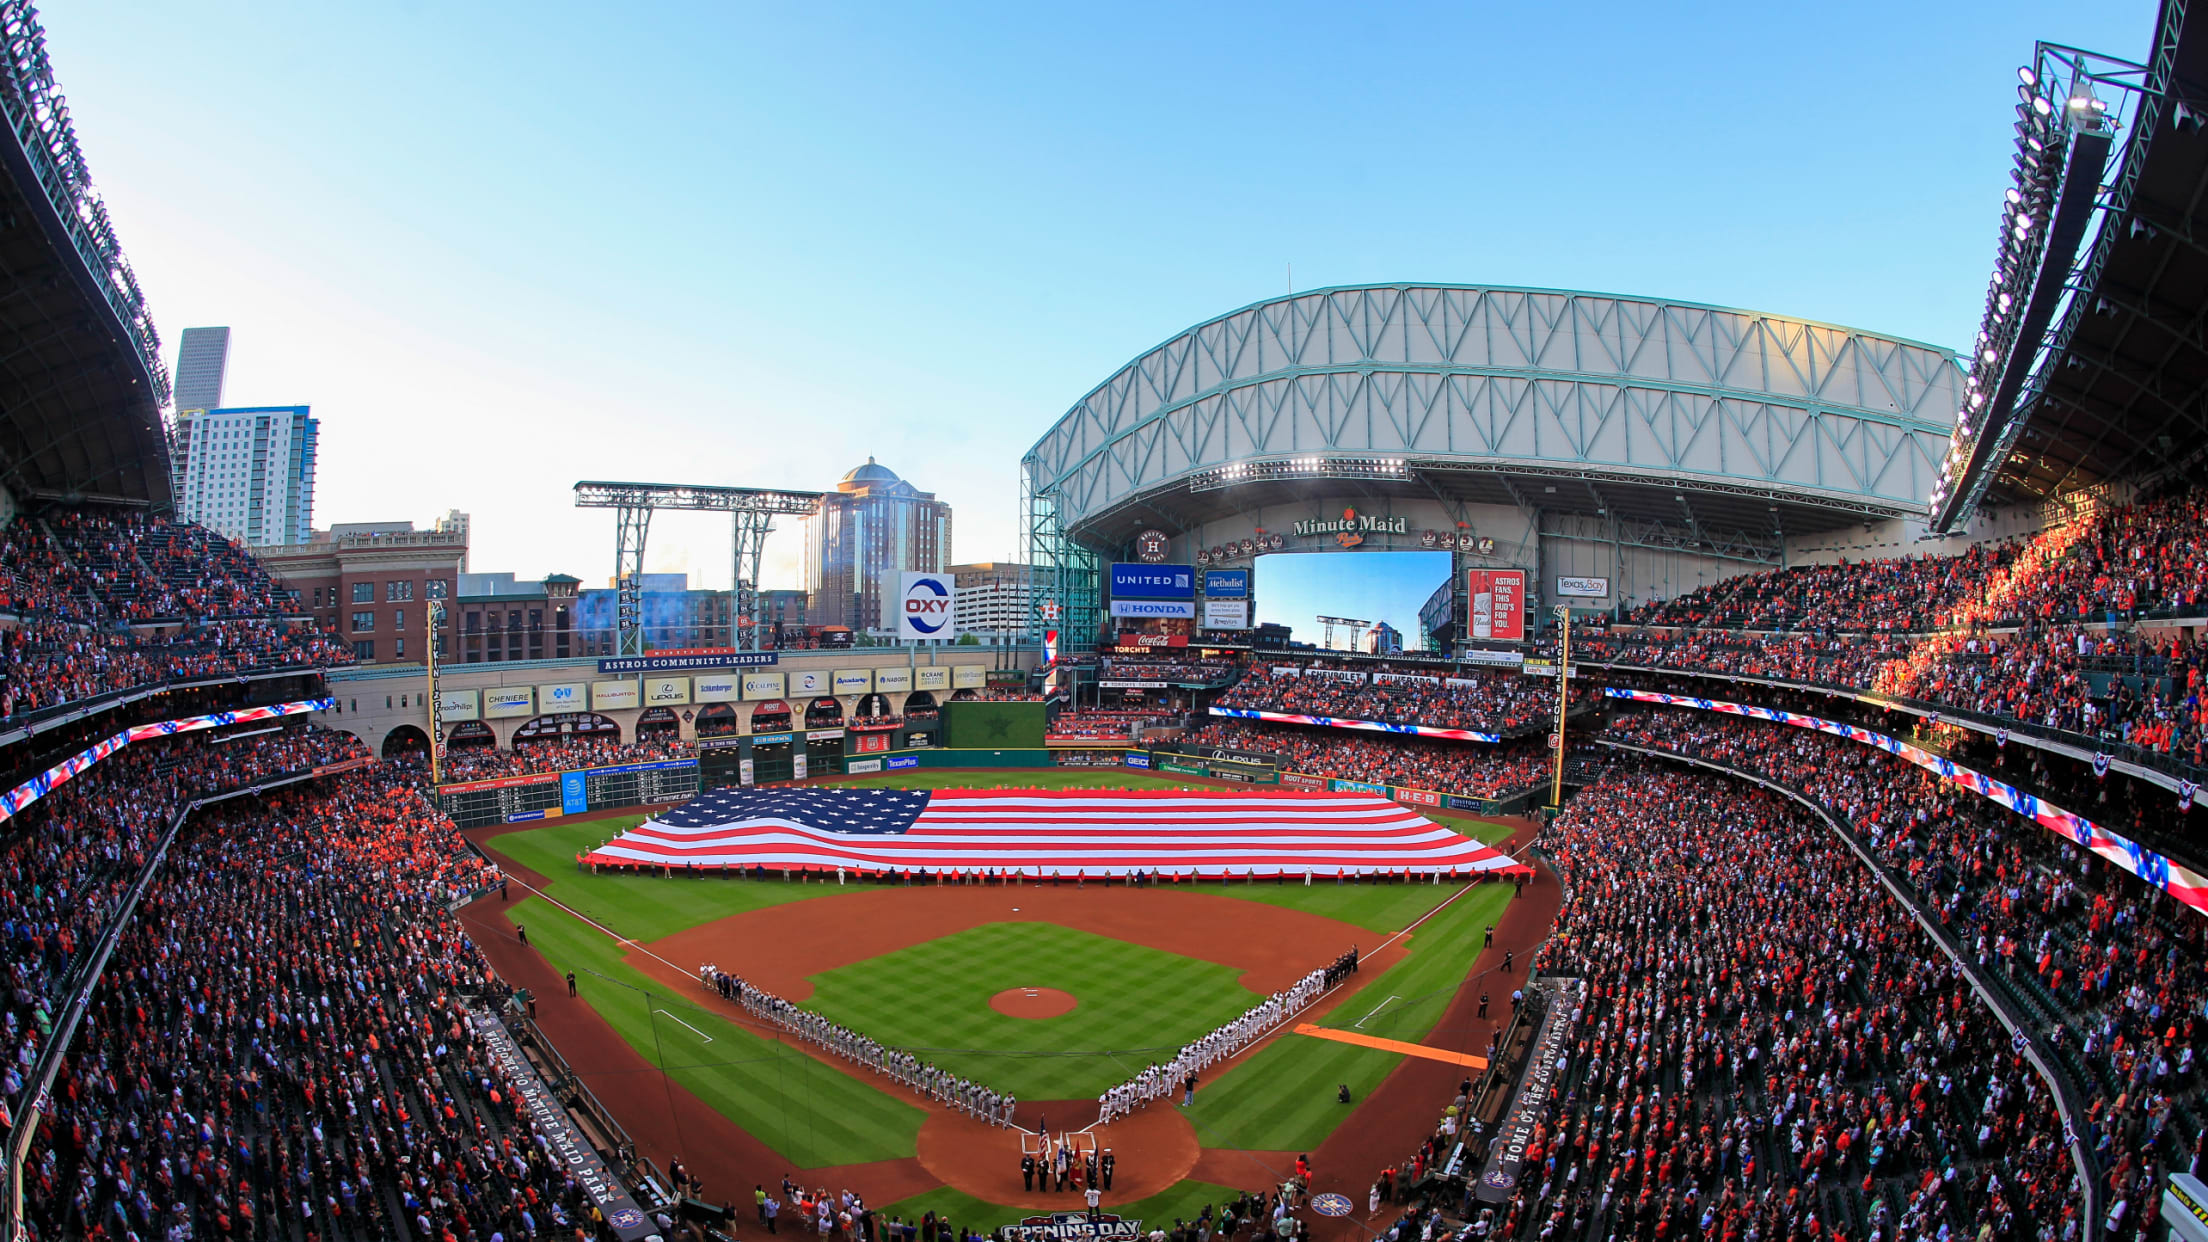 Playing Field, Houston Astros Special Events at Minute Maid Park